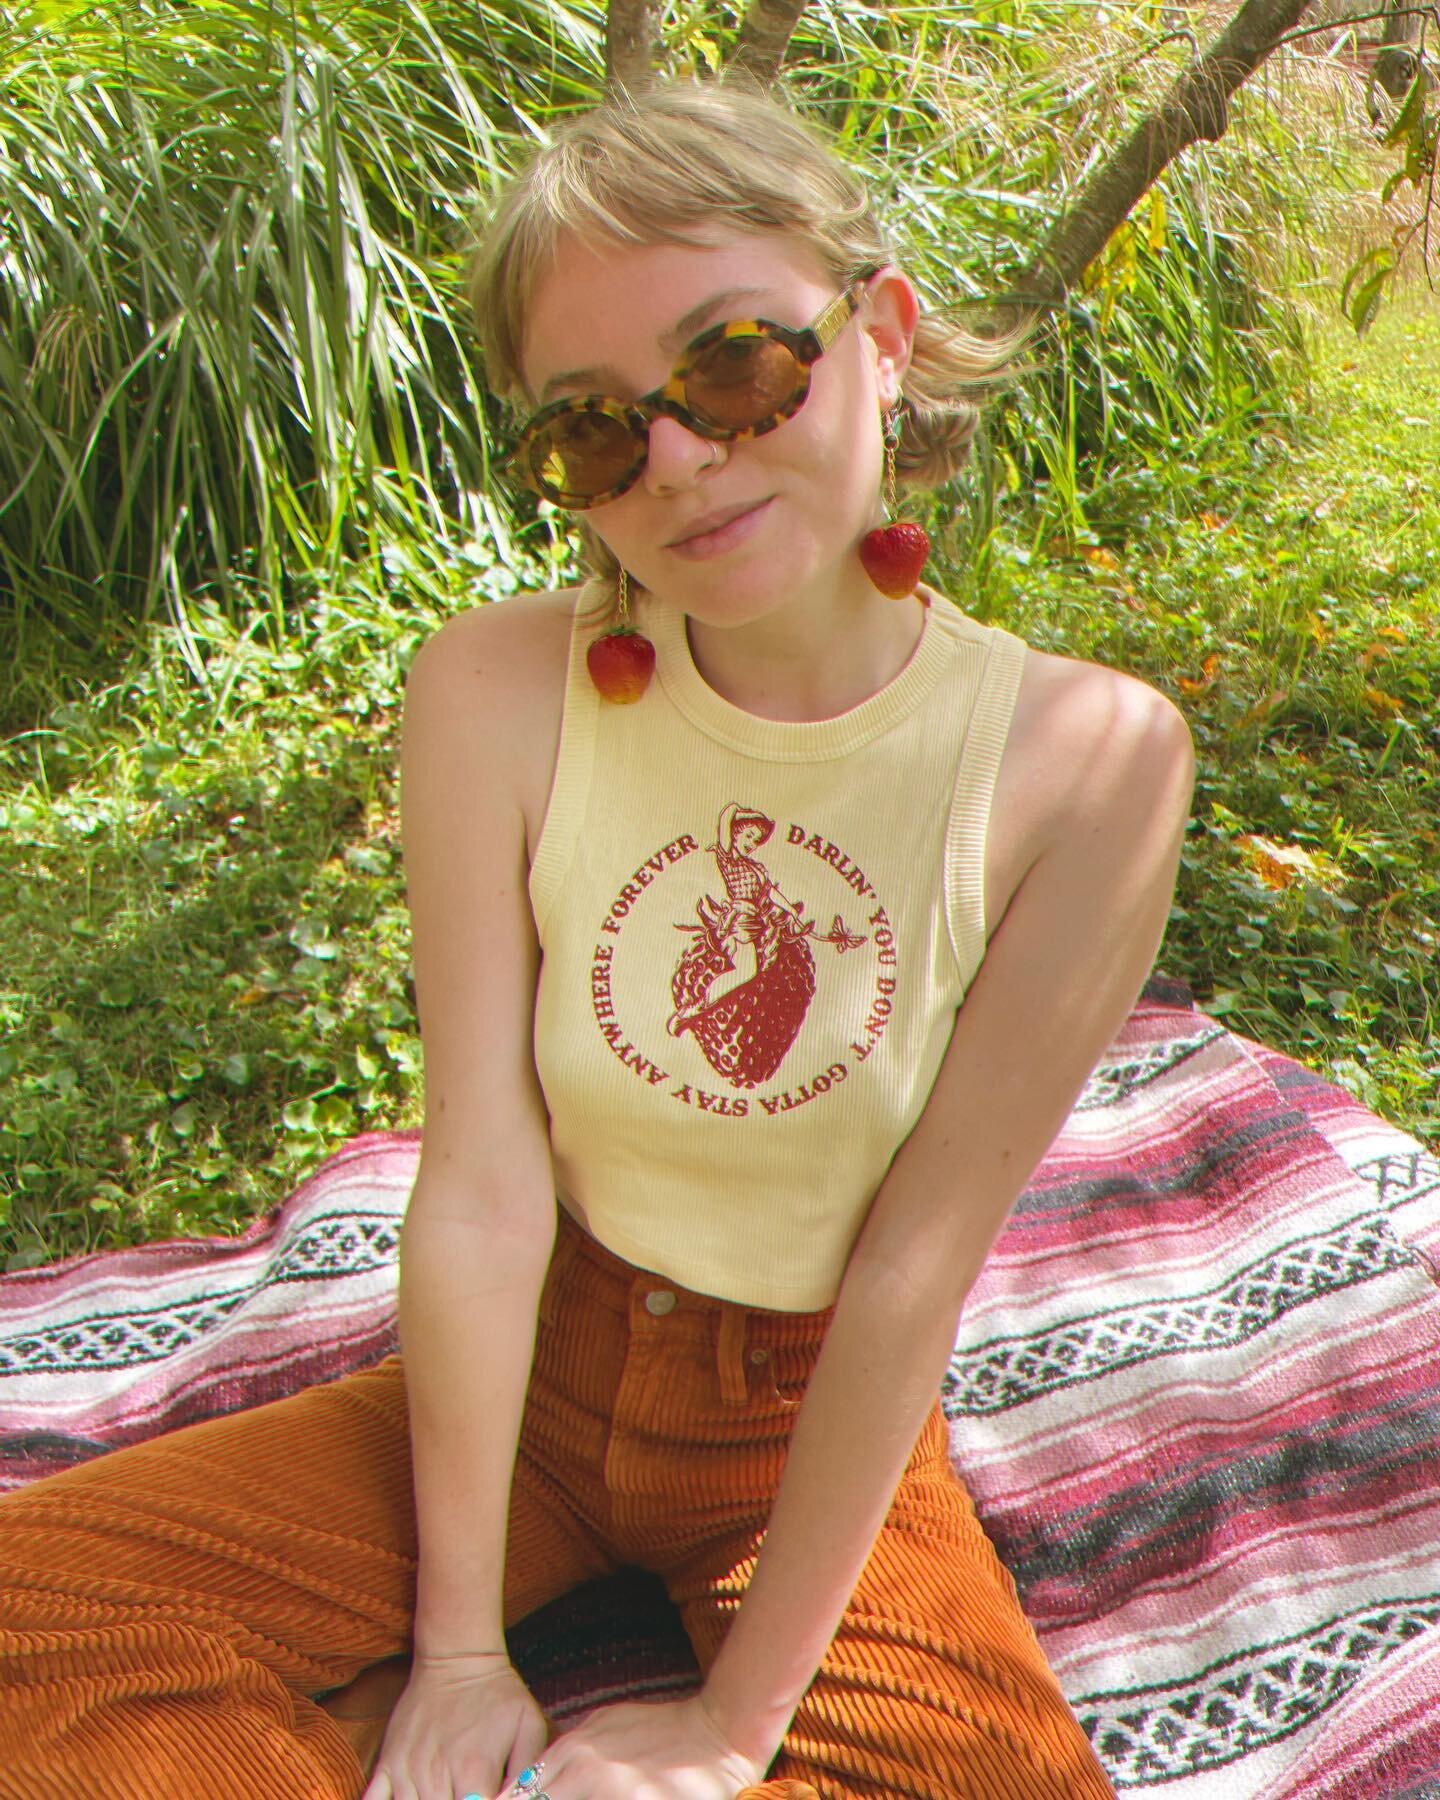 THEY'RE BACK❣️
Existential Cowgirl Tanks in two new colorways: Brick Red &amp; Mocha Brown on the cutest 100% cotton Butter Yellow cropped tanks 🤩
35 of these cuties will be available to purchase on my Etsy this Sunday at 8pm EST 💫⏰
Set your alarms